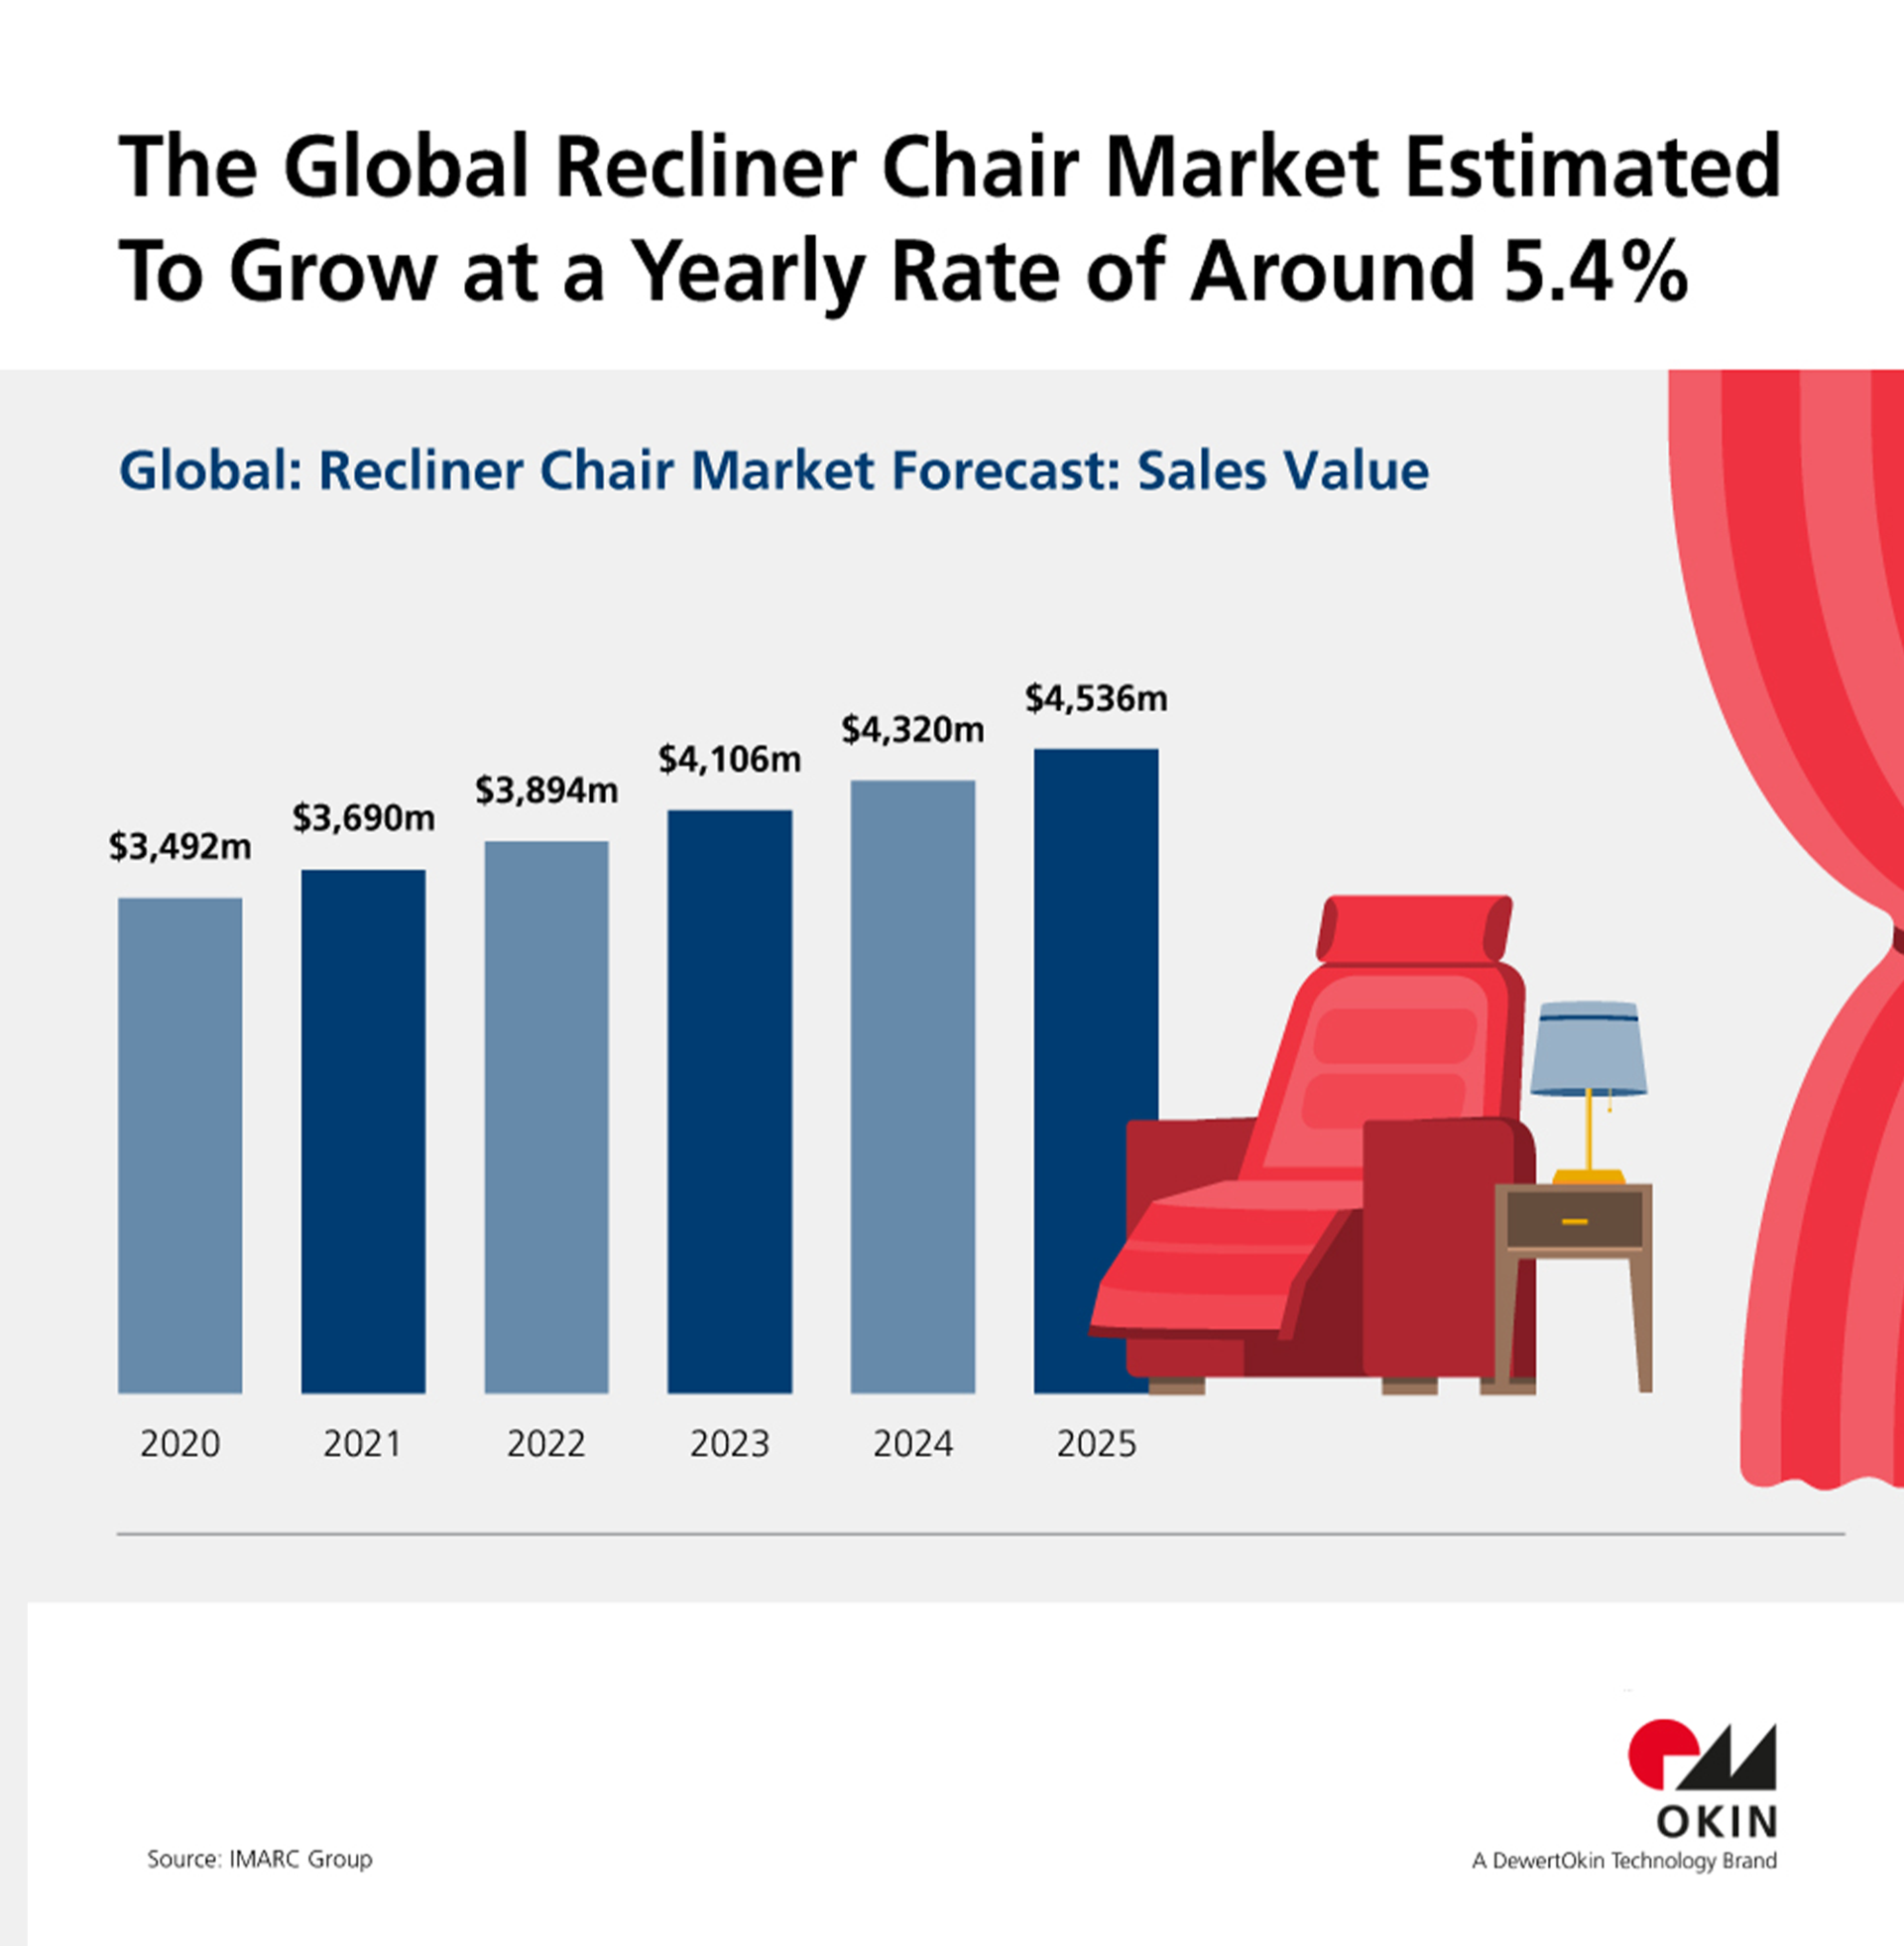 OKIN: More global growth for the market in recliner chairs until 2025